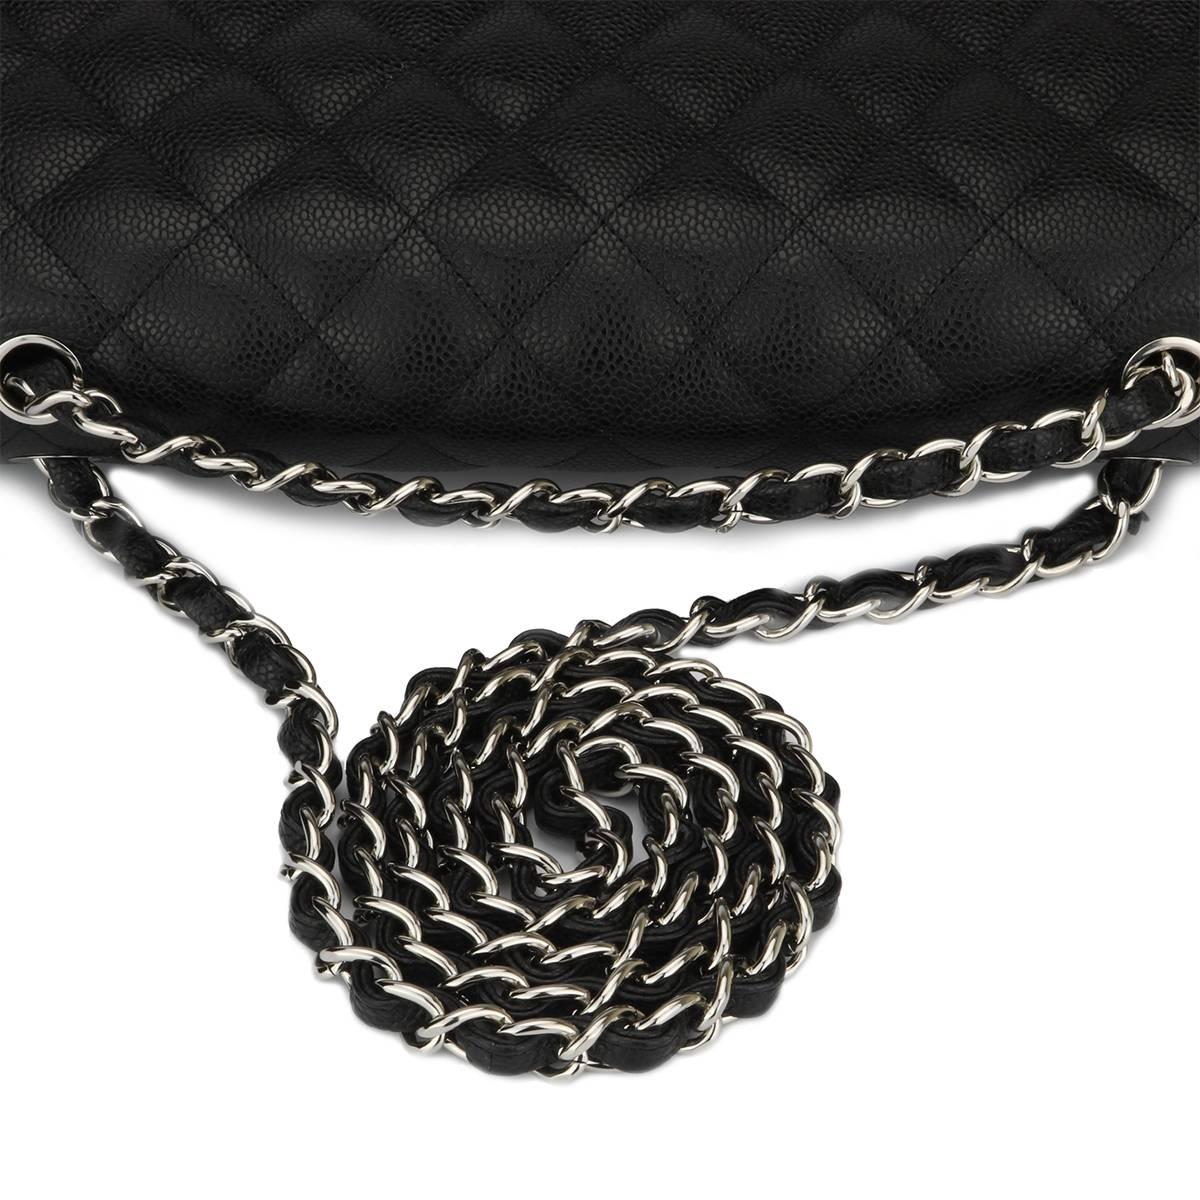 Chanel Classic Black Caviar Jumbo Double Flap Bag with Silver Hardware, 2010 5